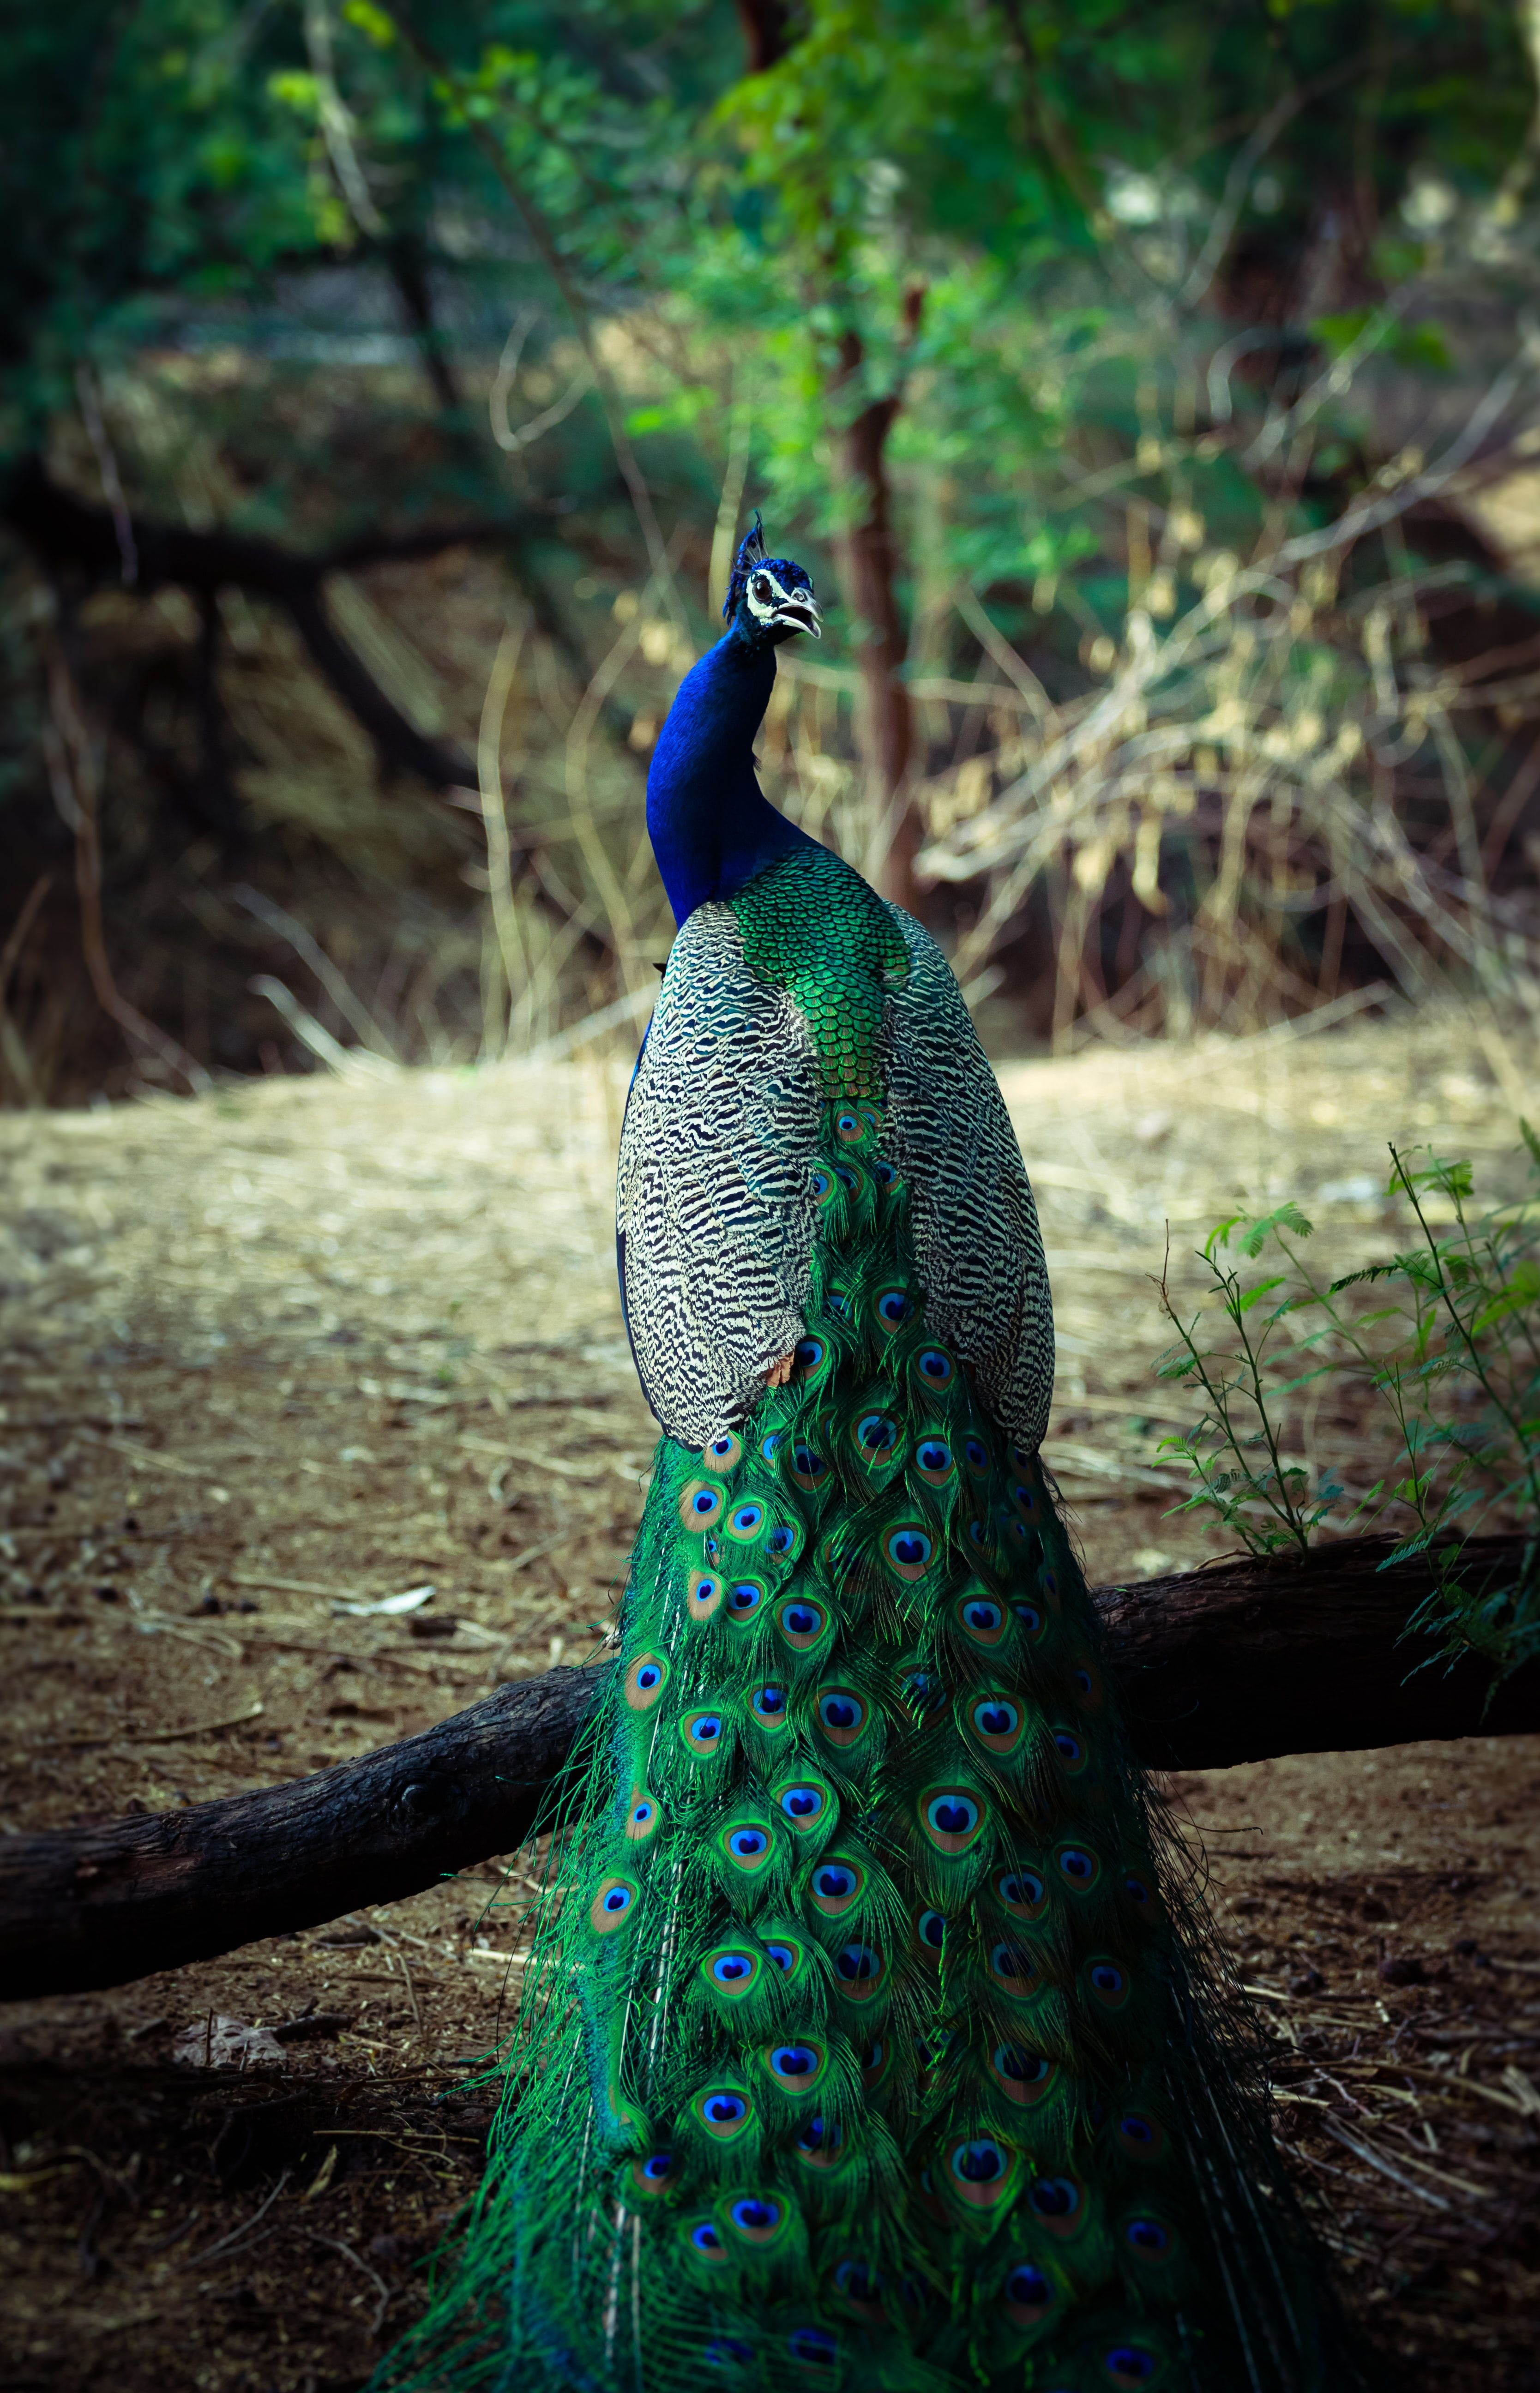 Peacock Android Phone Wallpapers - Wallpaper Cave